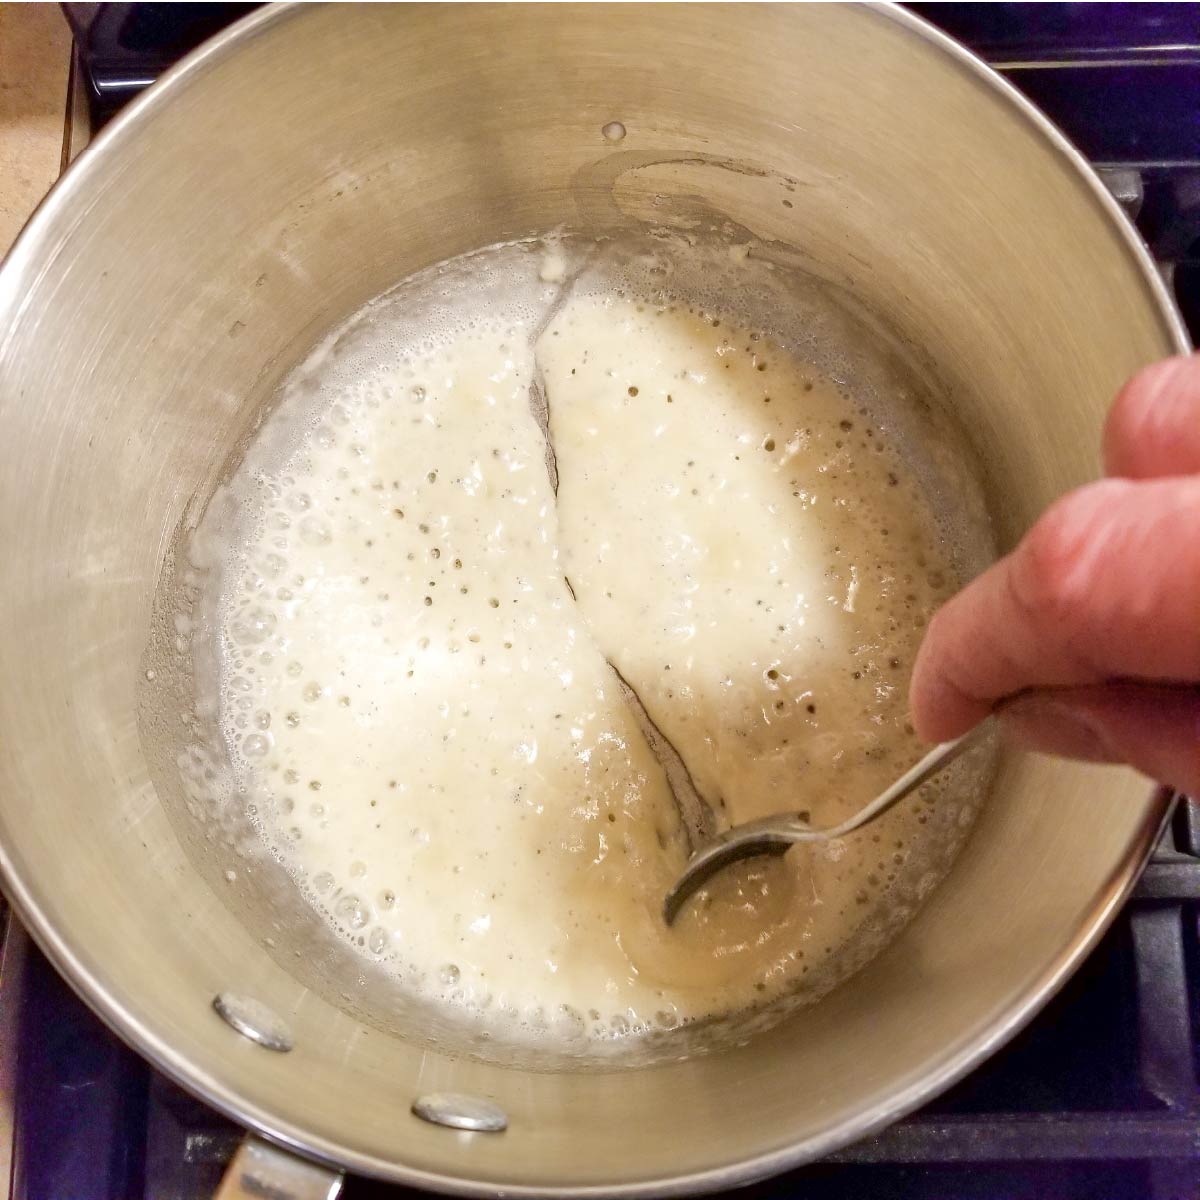 The flour and butter in the pan should be thick like this before adding the milk and cream.